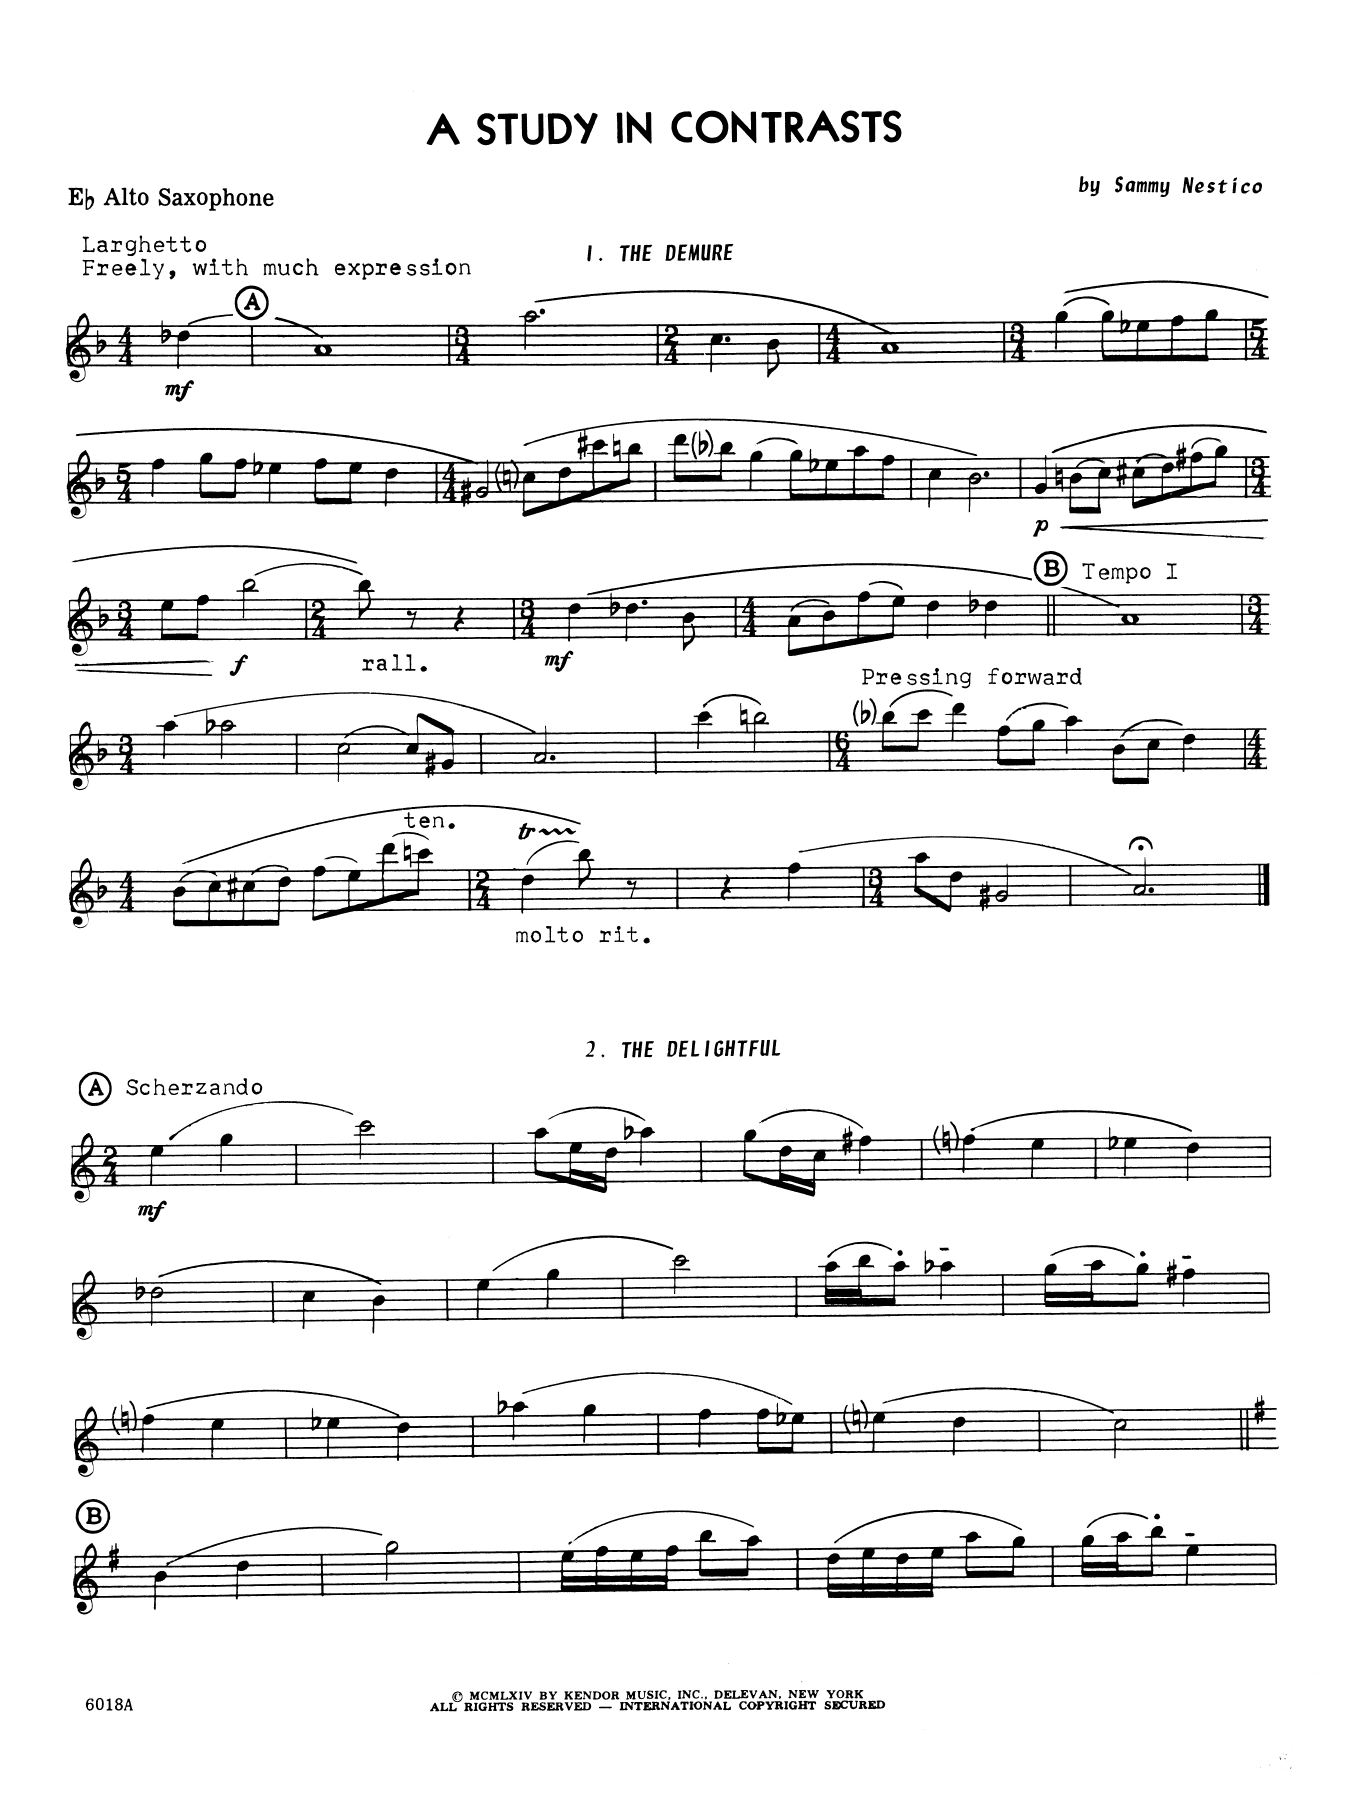 Download Sammy Nestico A Study In Contrasts - Eb Alto Saxophon Sheet Music